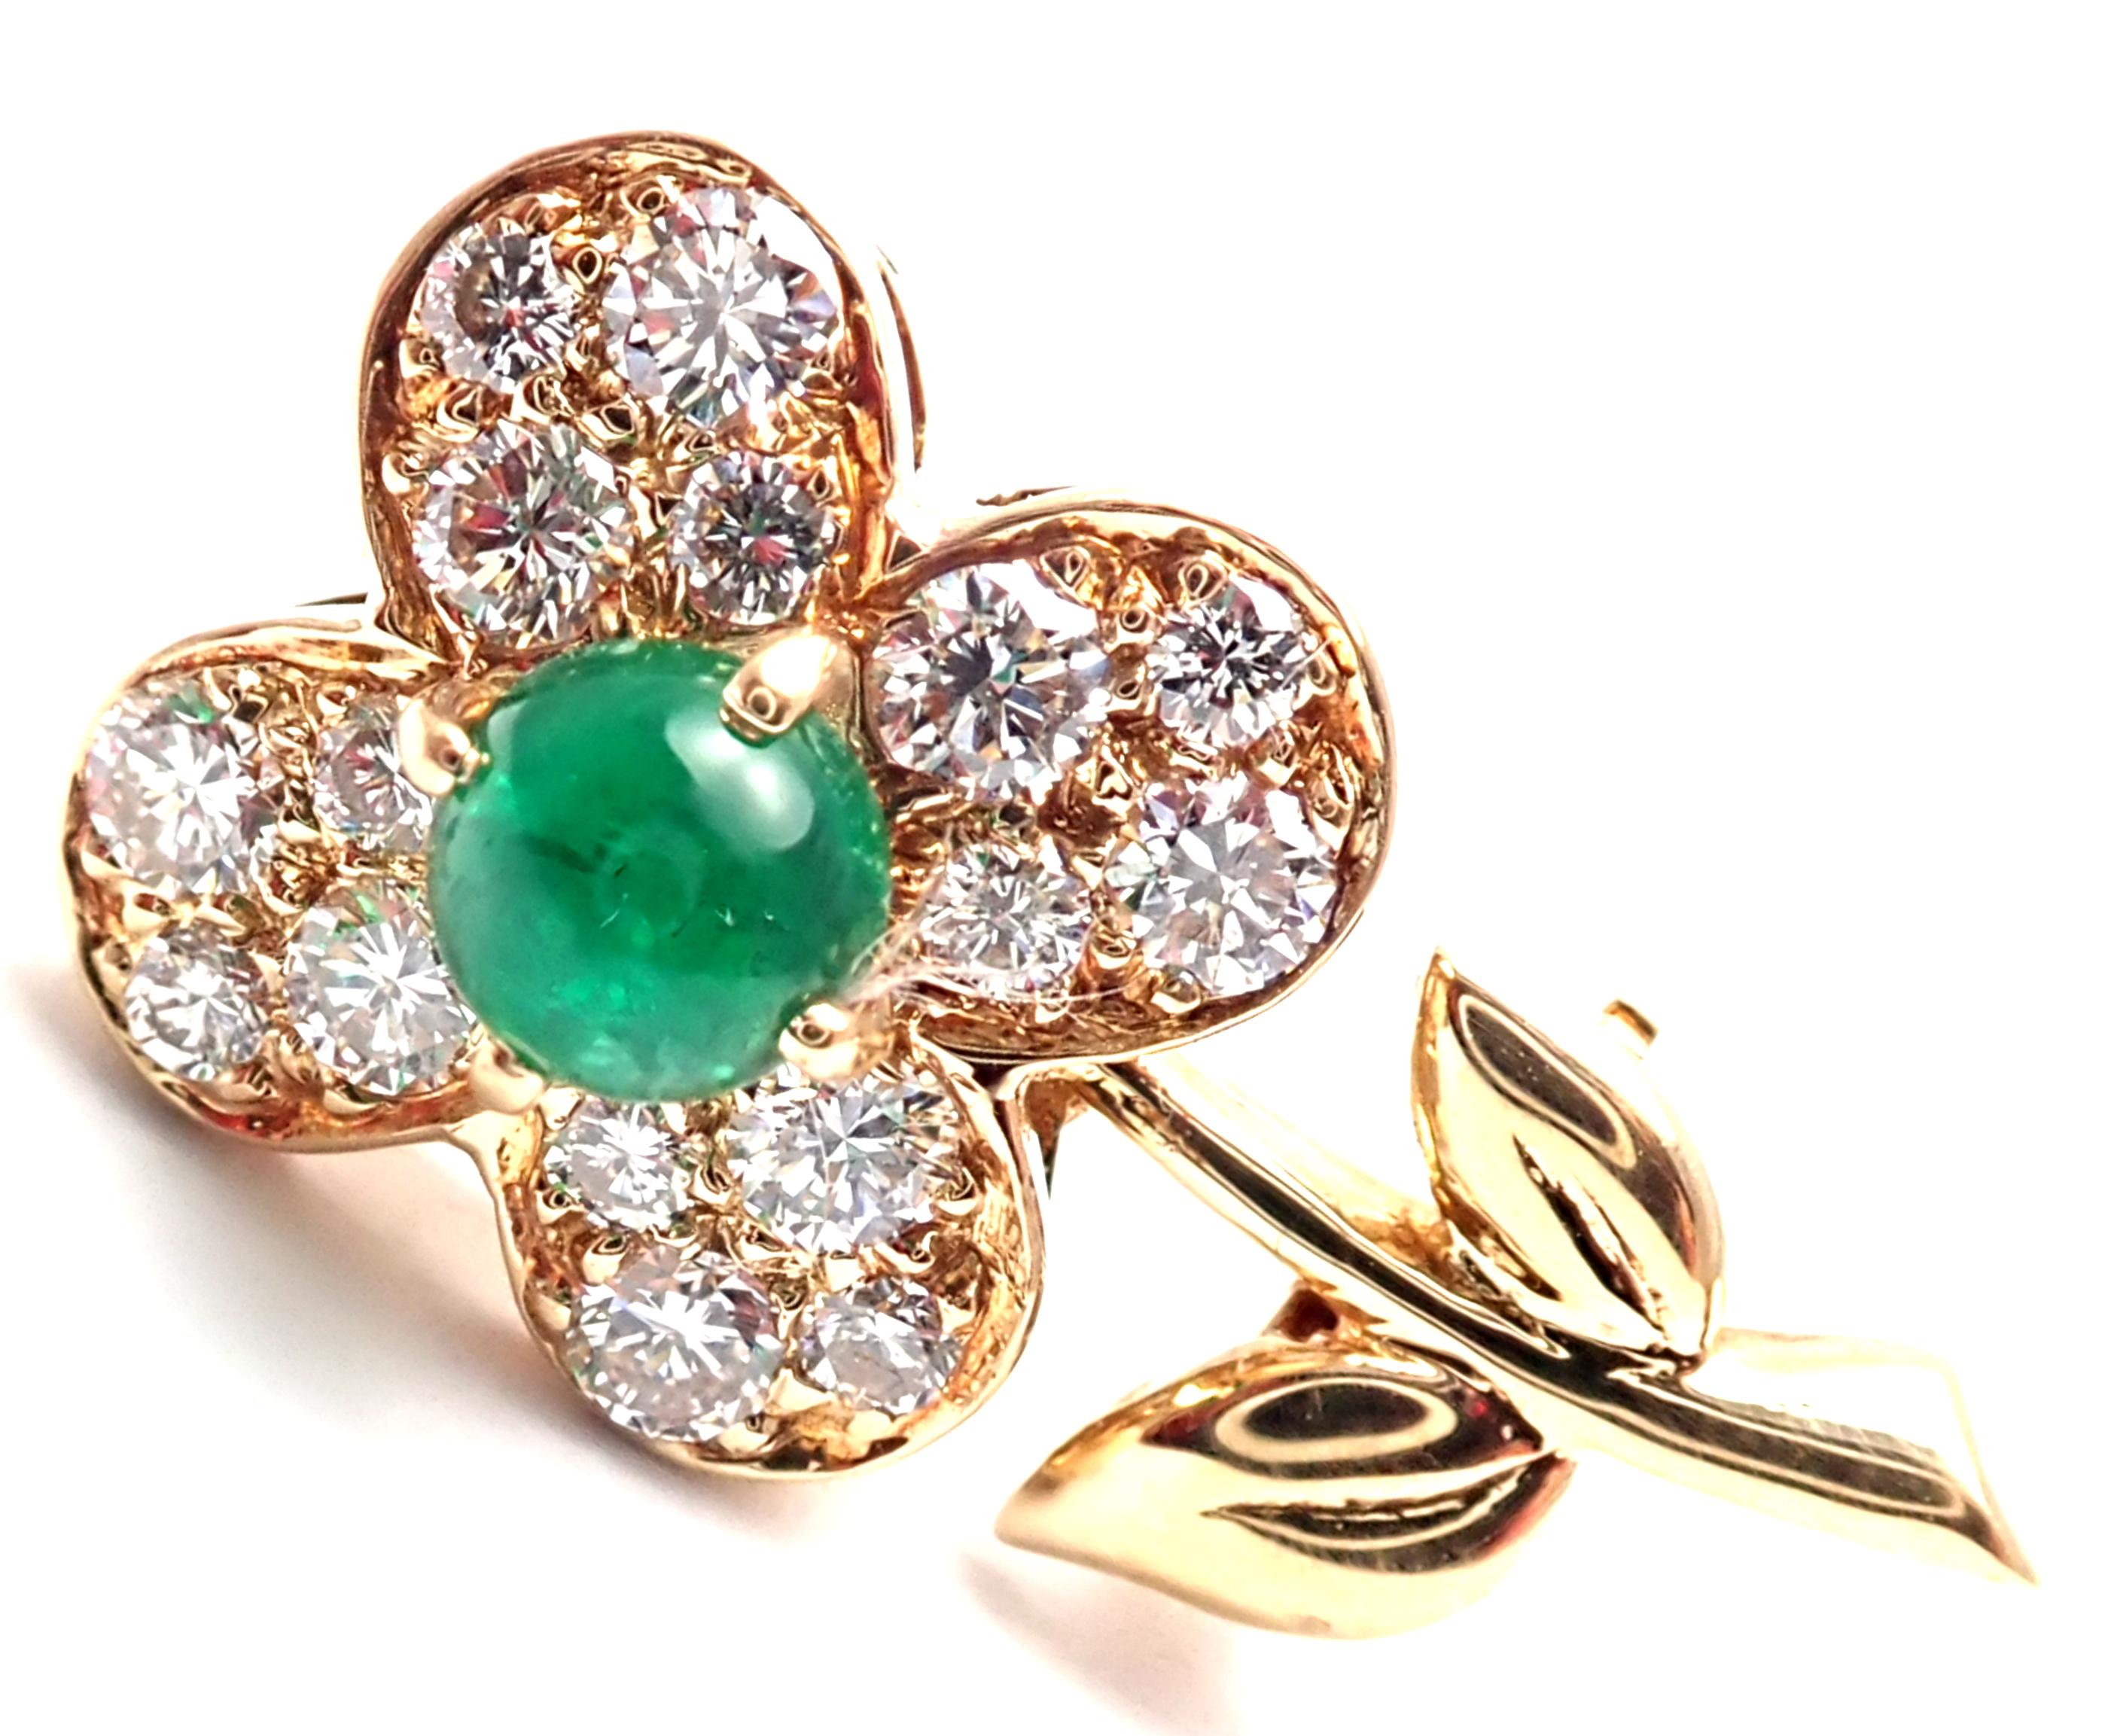 18k Yellow Gold Flower Diamond Emerald Brooch Pin by Van Cleef & Arpels. 
With 16 diamond VVS1 clarity, G color total weight .33ct
1 cabochon emerald 4.5mm
Details: 
Measurements: 20mm x 10mm
Weight: 3.3 grams
Stamped Hallmarks: VCA 750 B(*serial